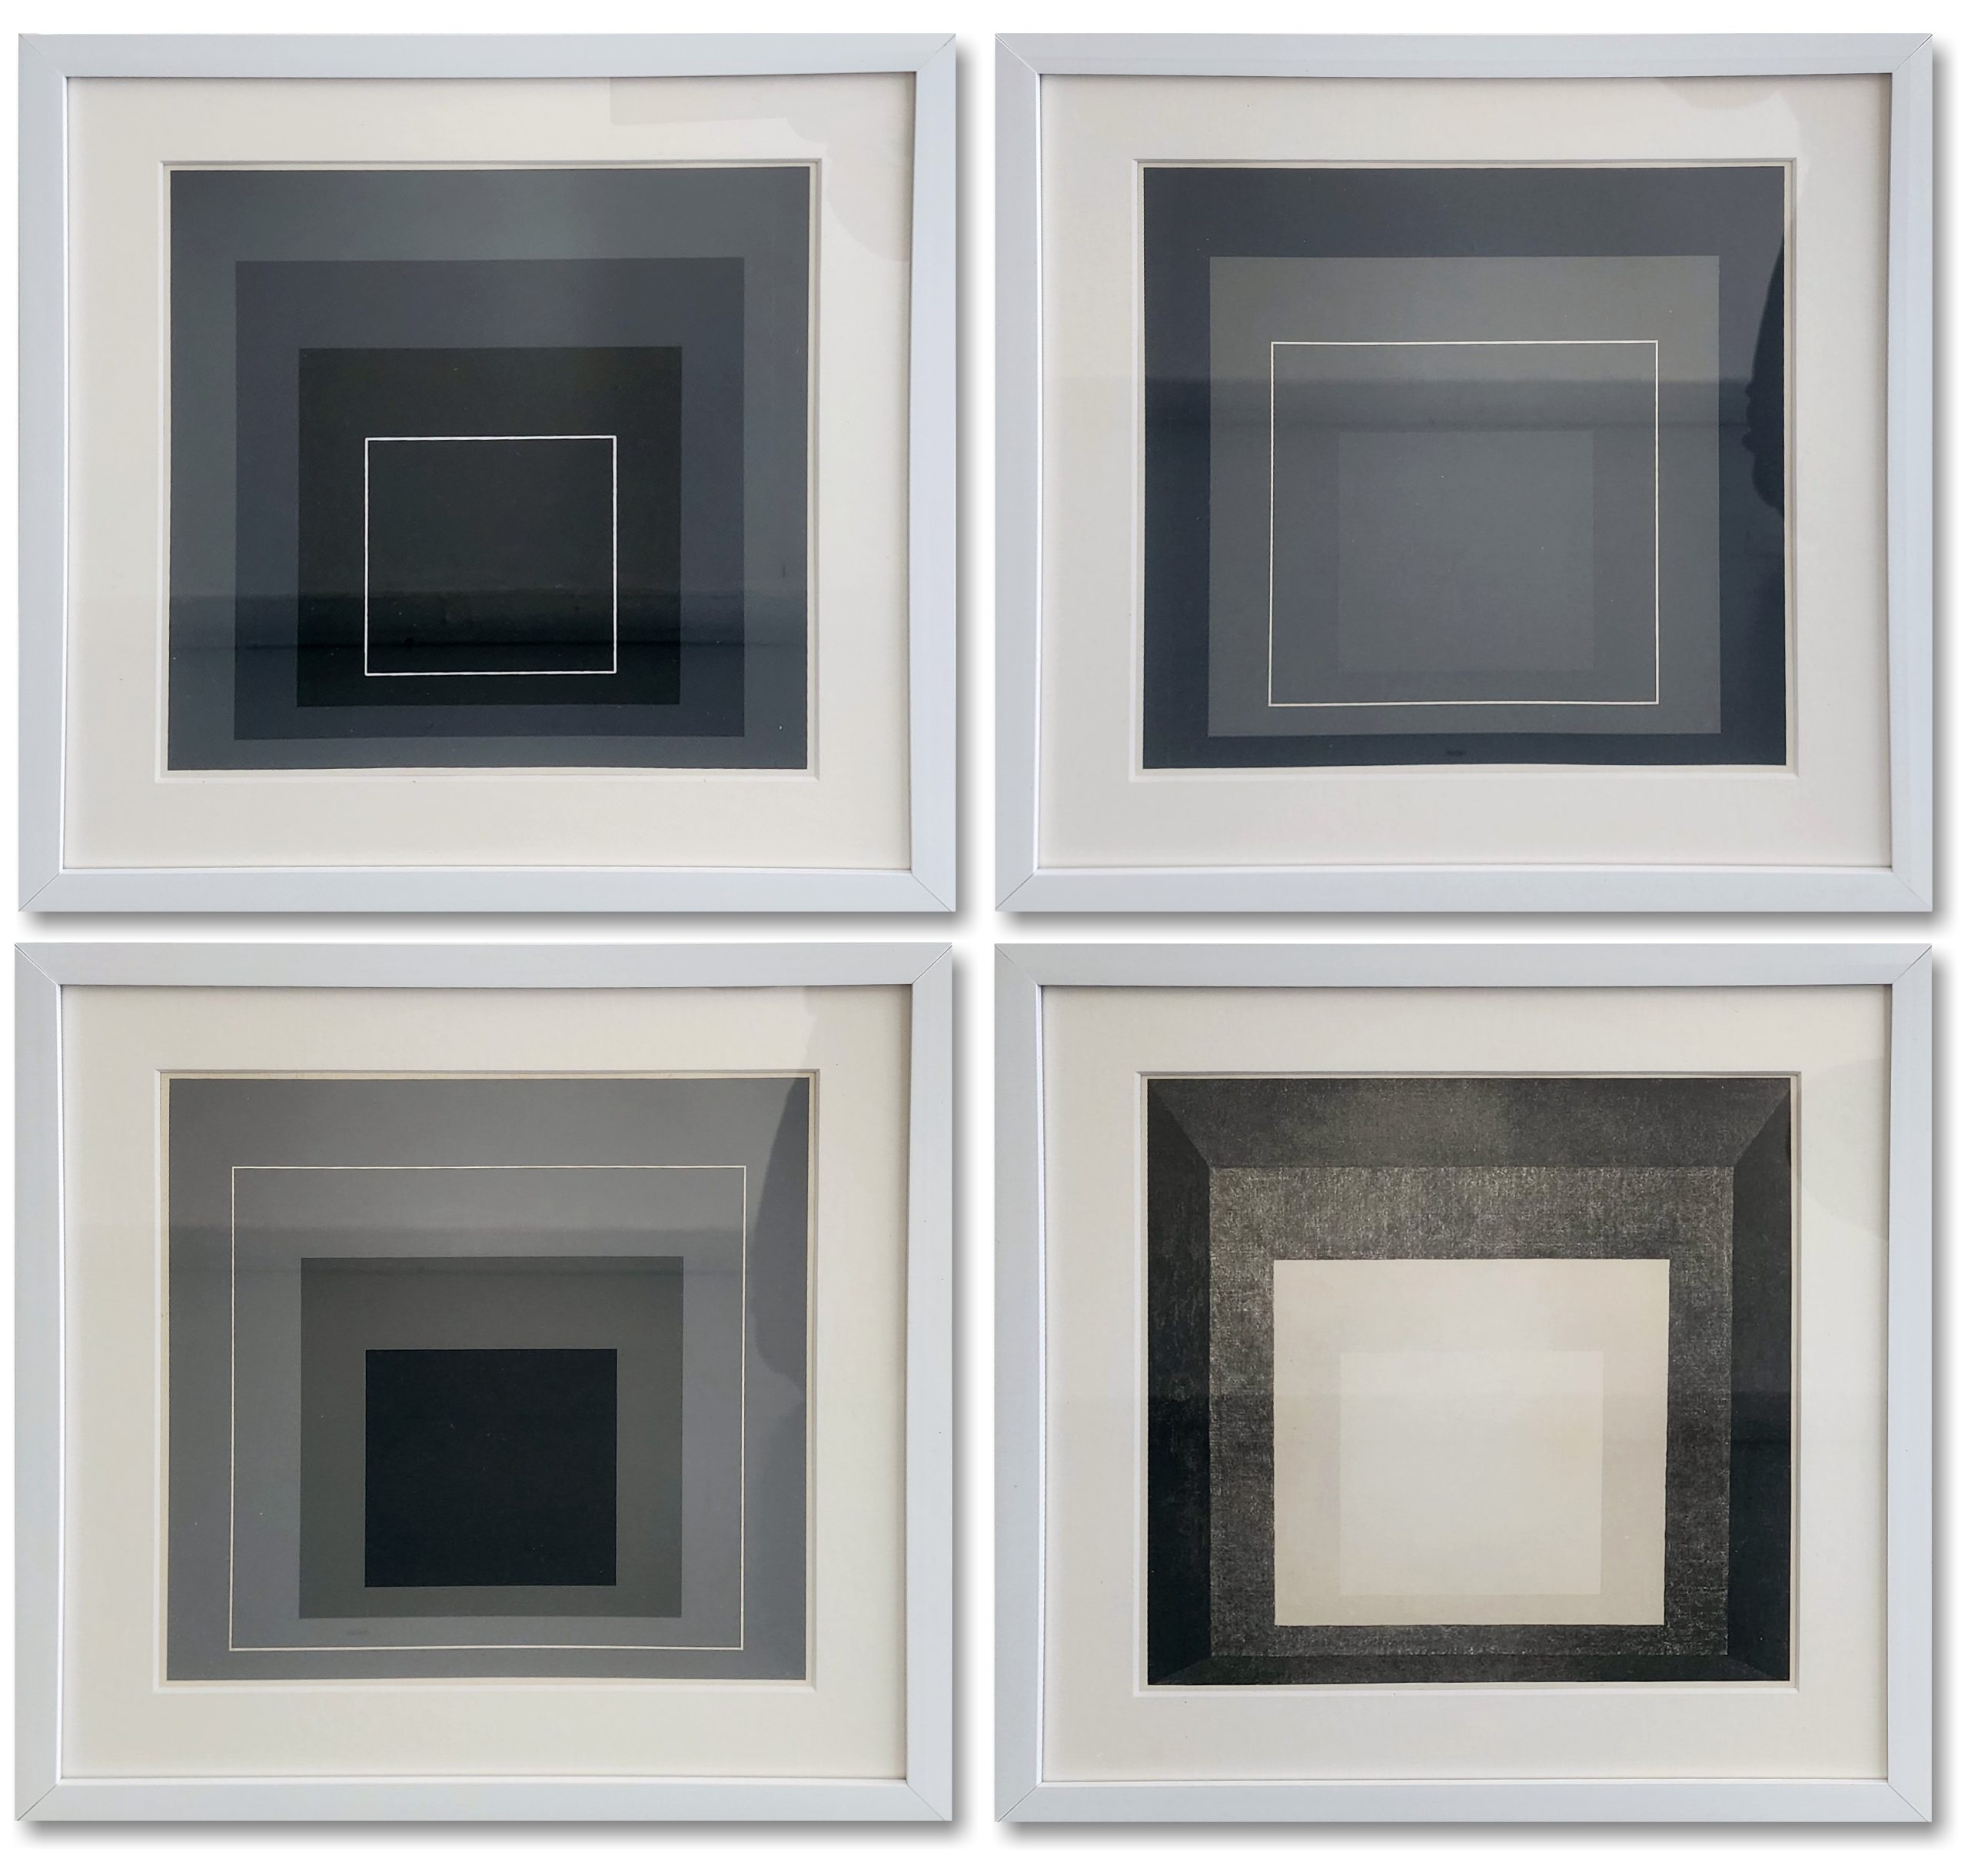 Homage to the Square (Hommage au Carre) - Set of Four (4) Screenprints - Josef Albers